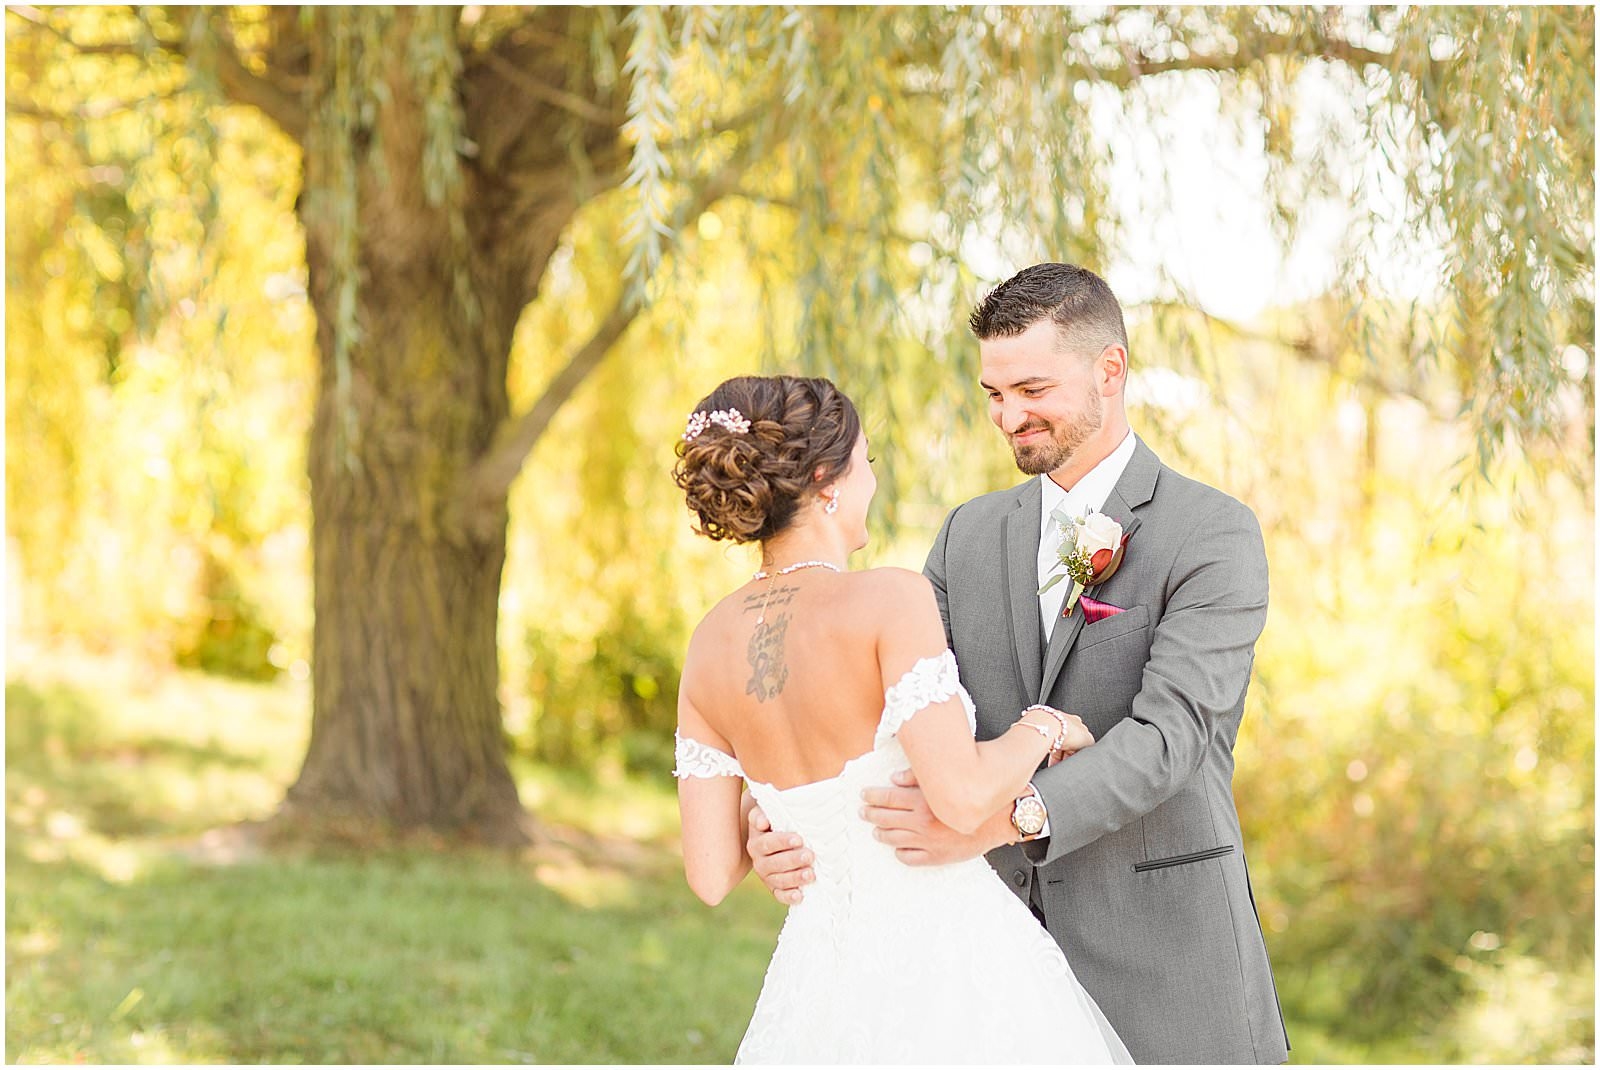 A Stunning Fall Wedding in Indianapolis, IN |. Sally and Andrew | Bret and Brandie Photography 0047.jpg